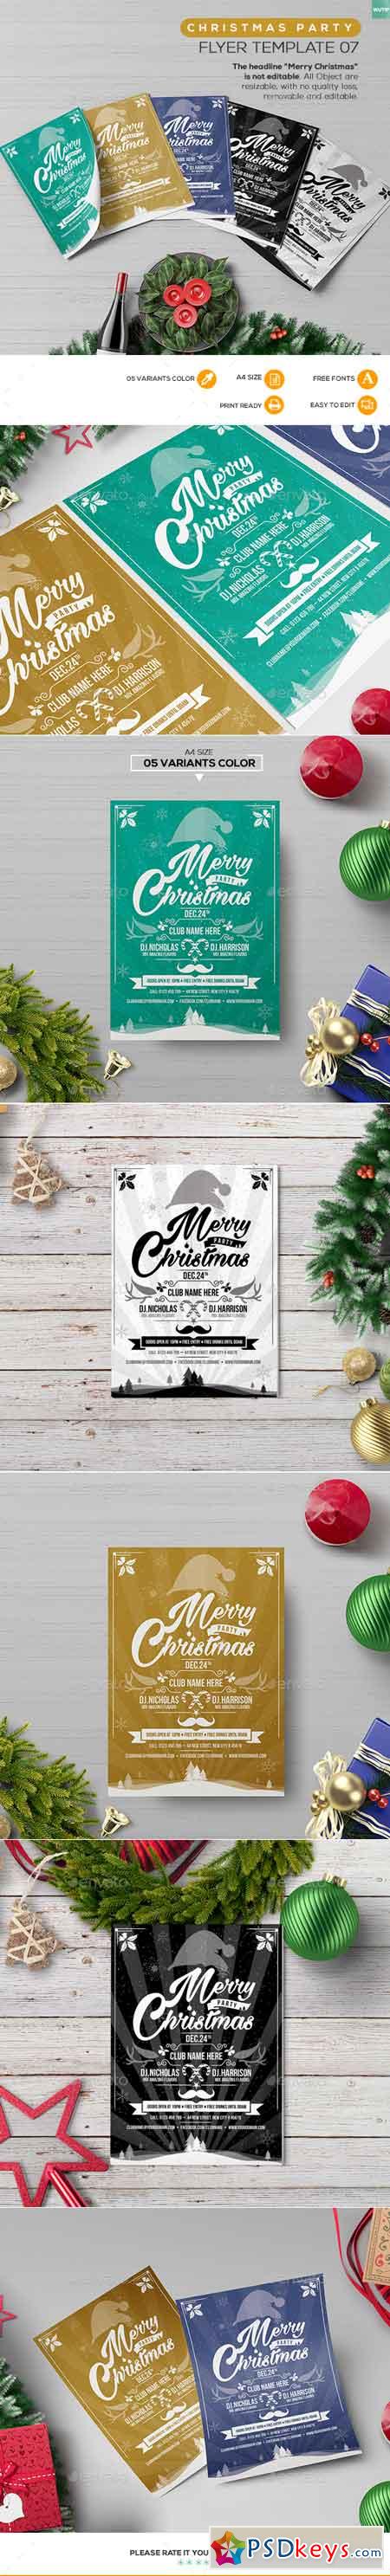 Christmas Party - Flyer Template 07 13761640